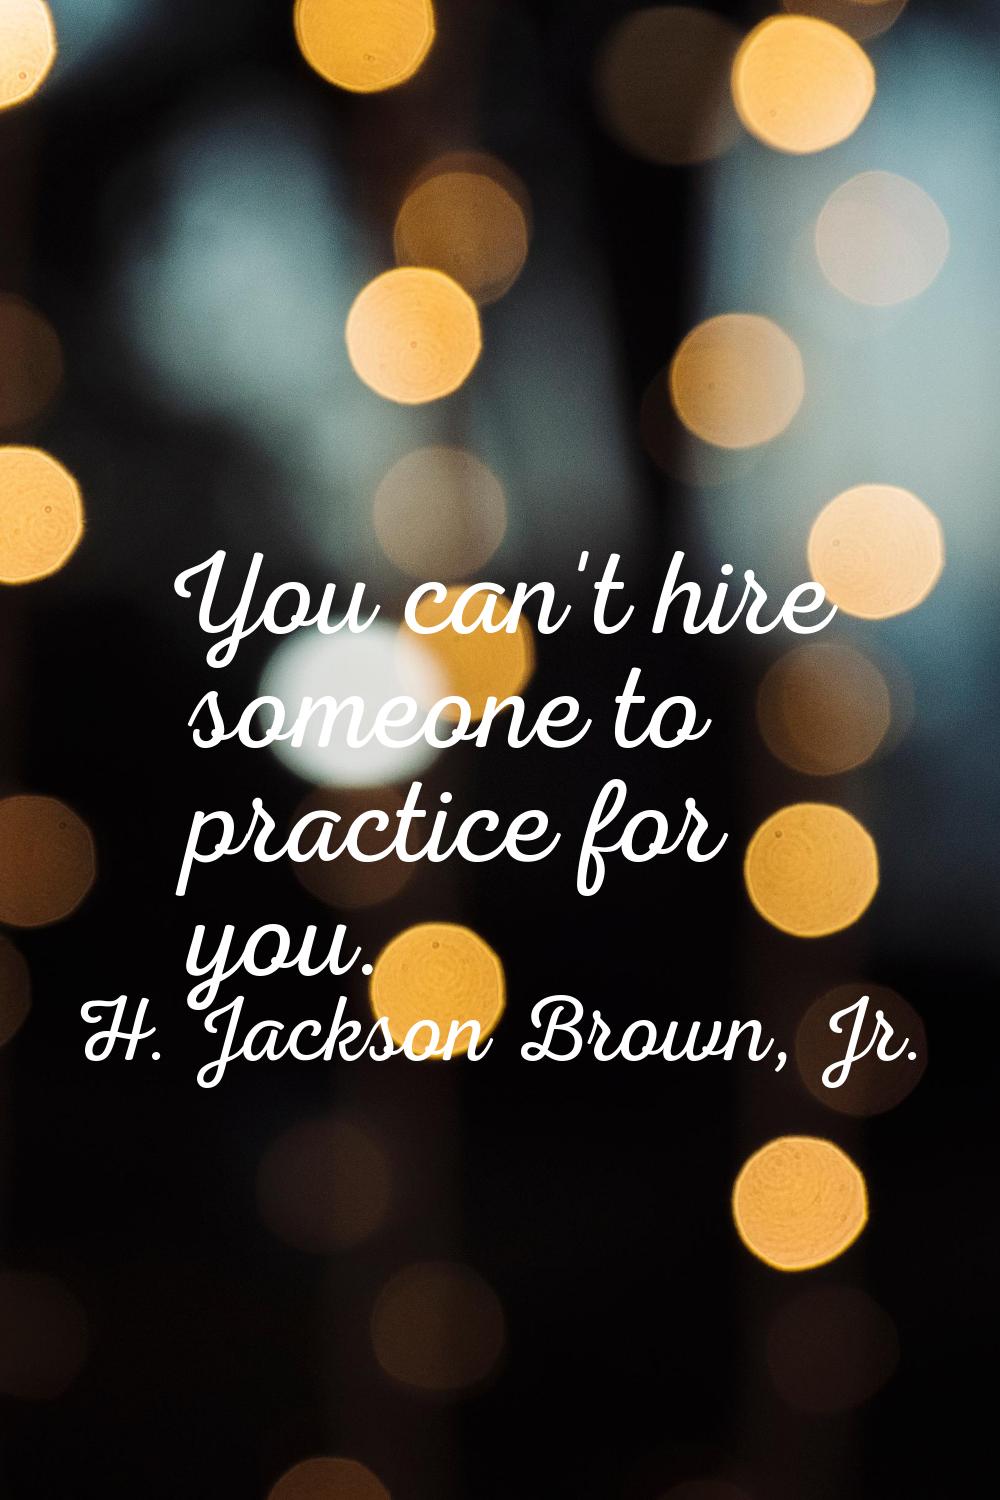 You can't hire someone to practice for you.